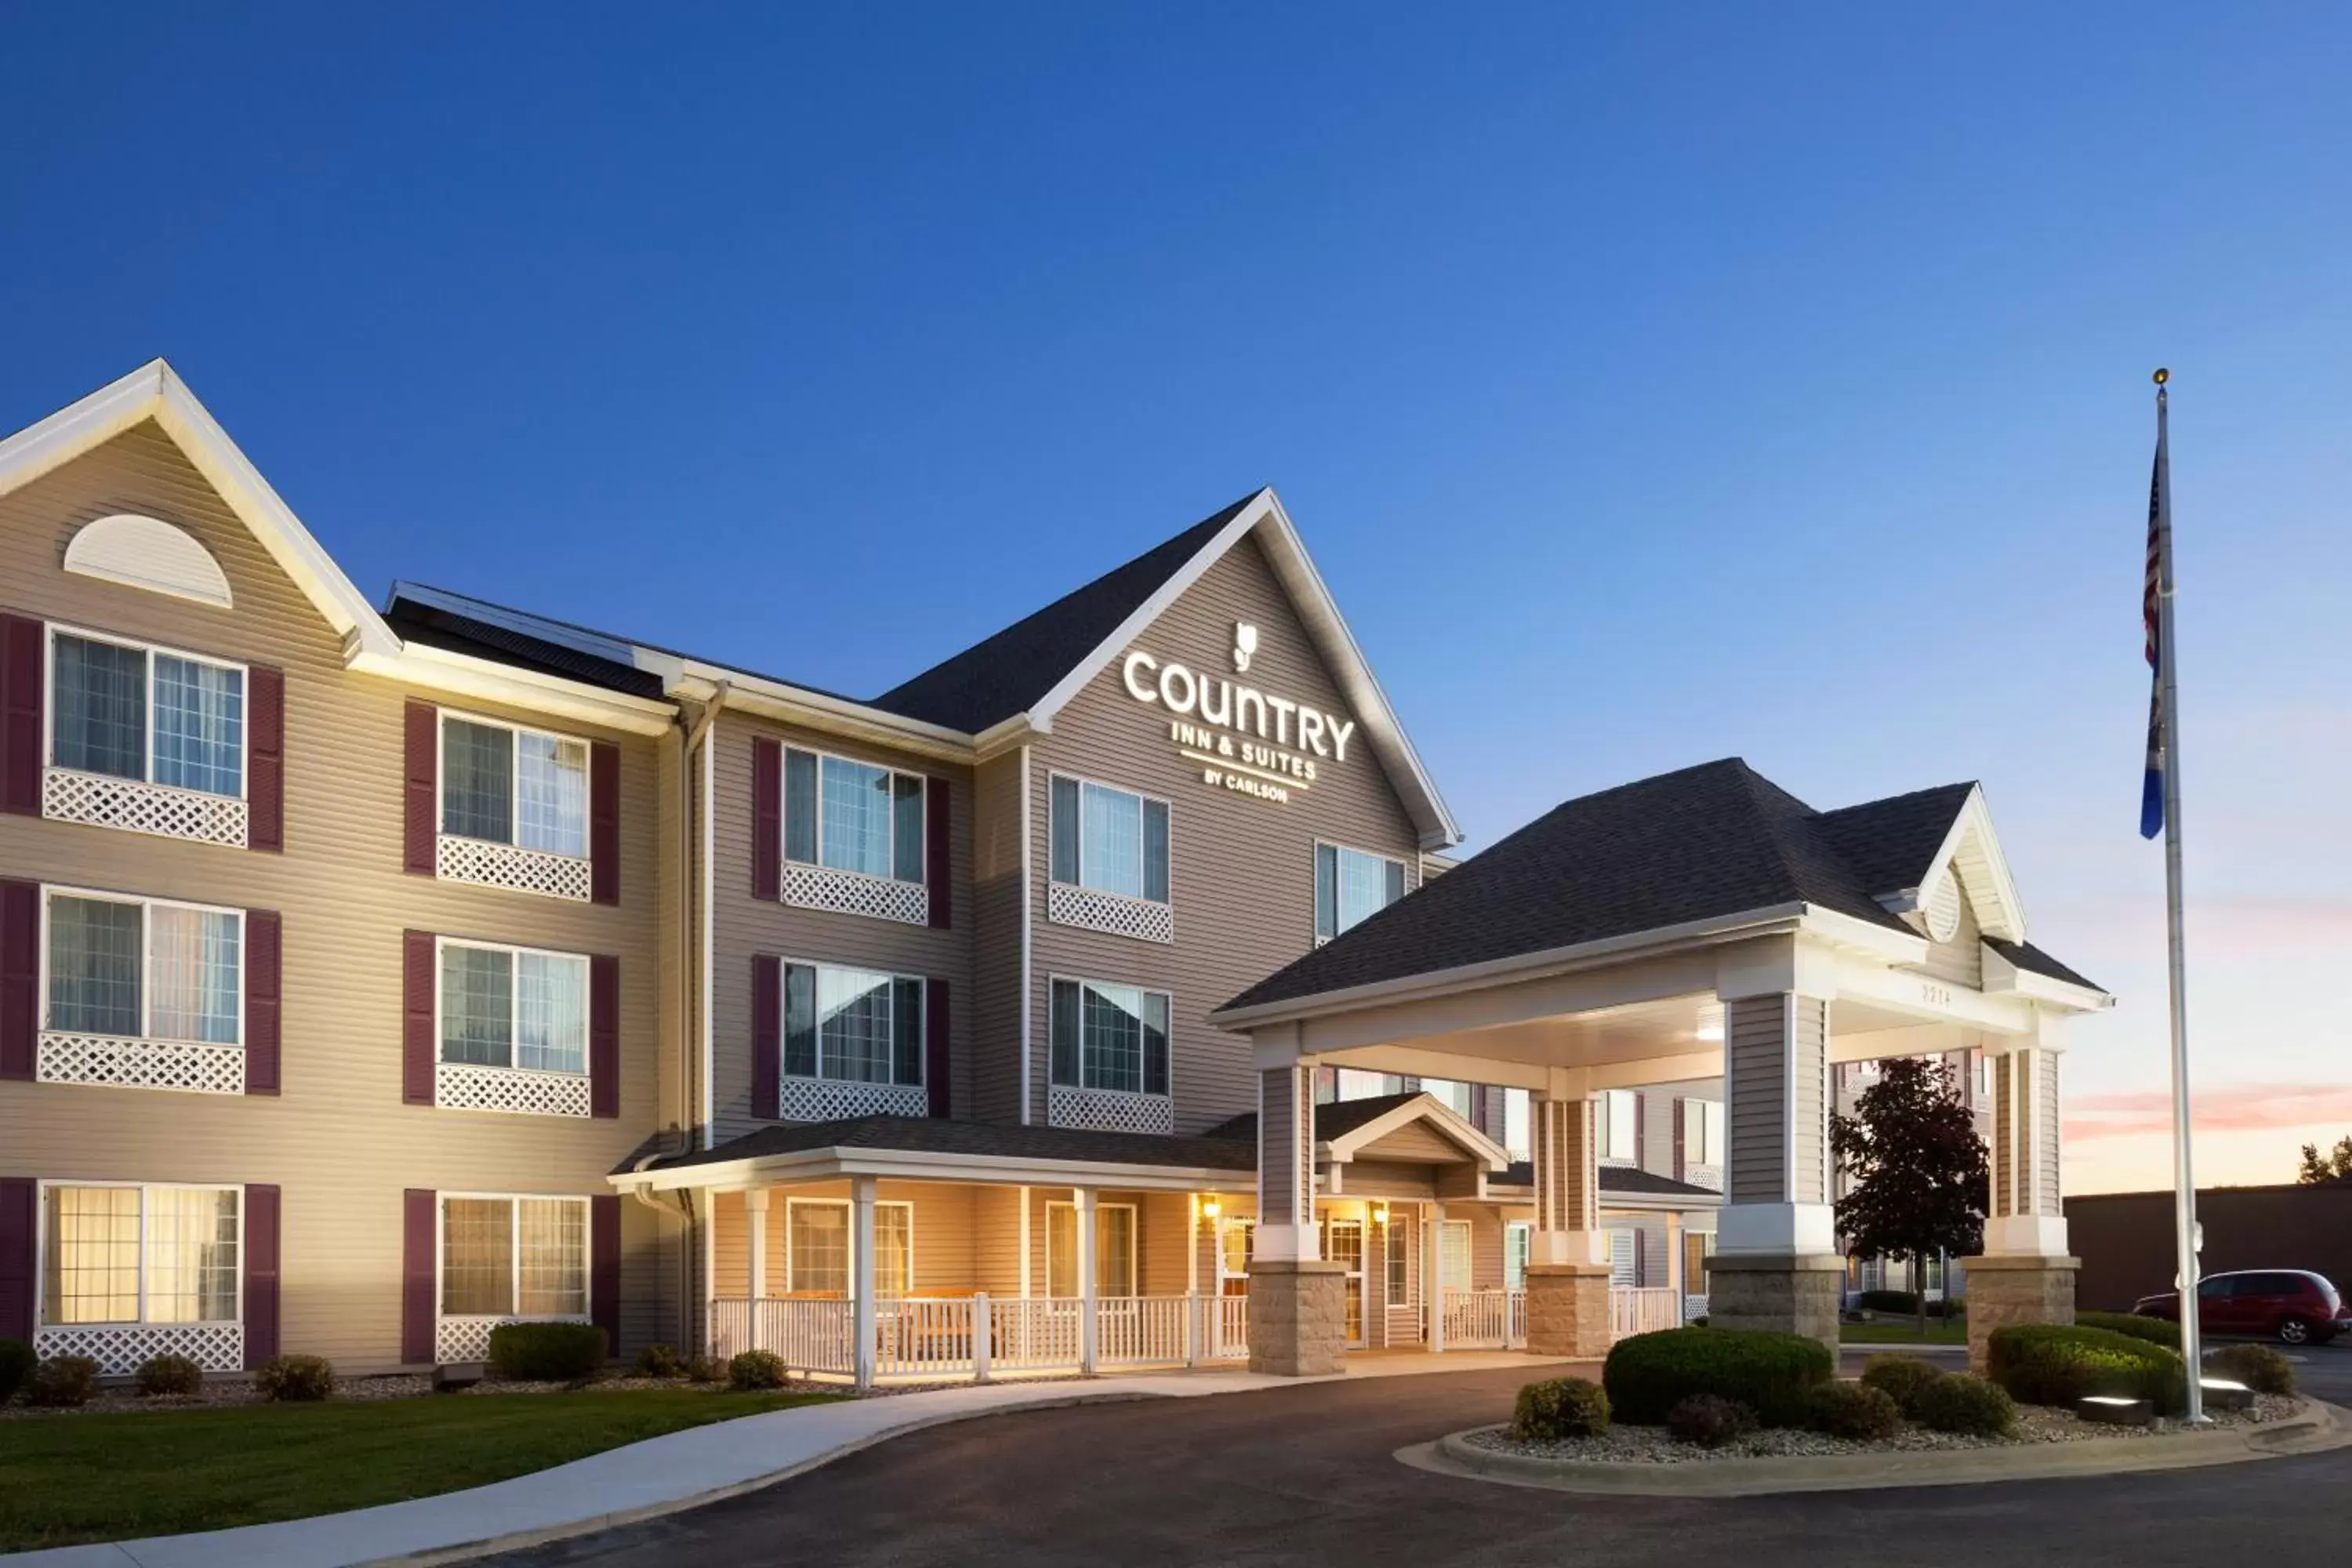 Facade/entrance, Property Building in Country Inn & Suites by Radisson, Albert Lea, MN